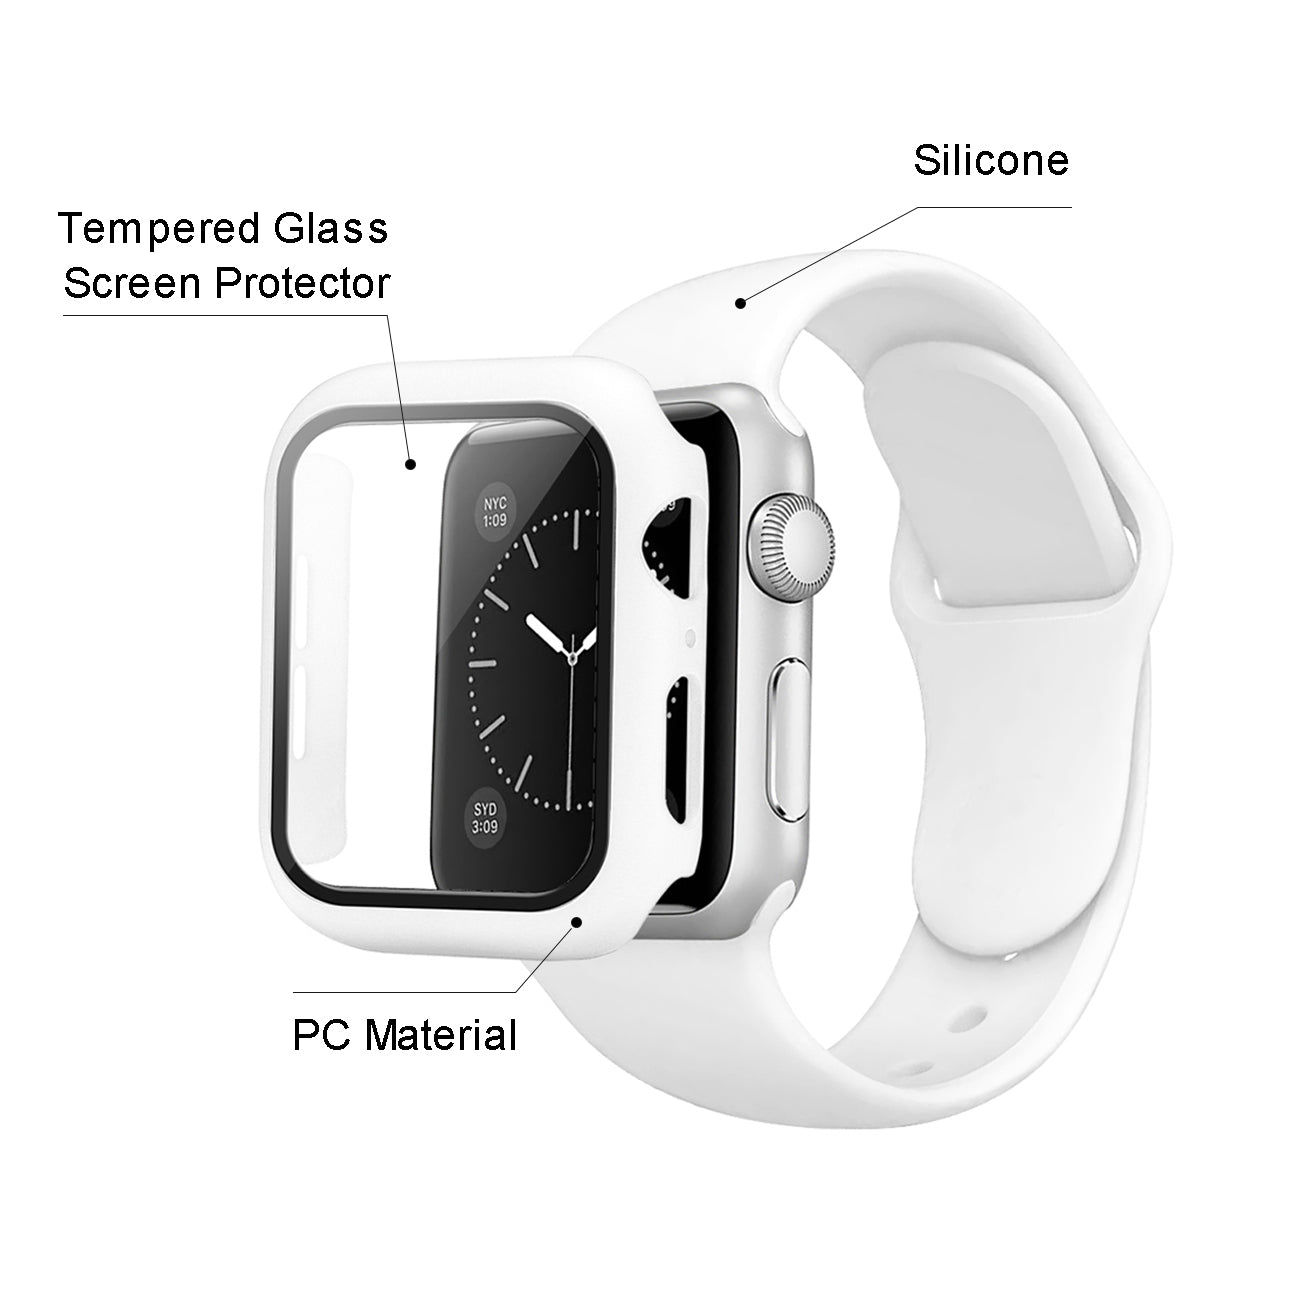 Watch Case PC With Glass Screen Protector, Silicone Watch Band Apple Watch 42mm White Color